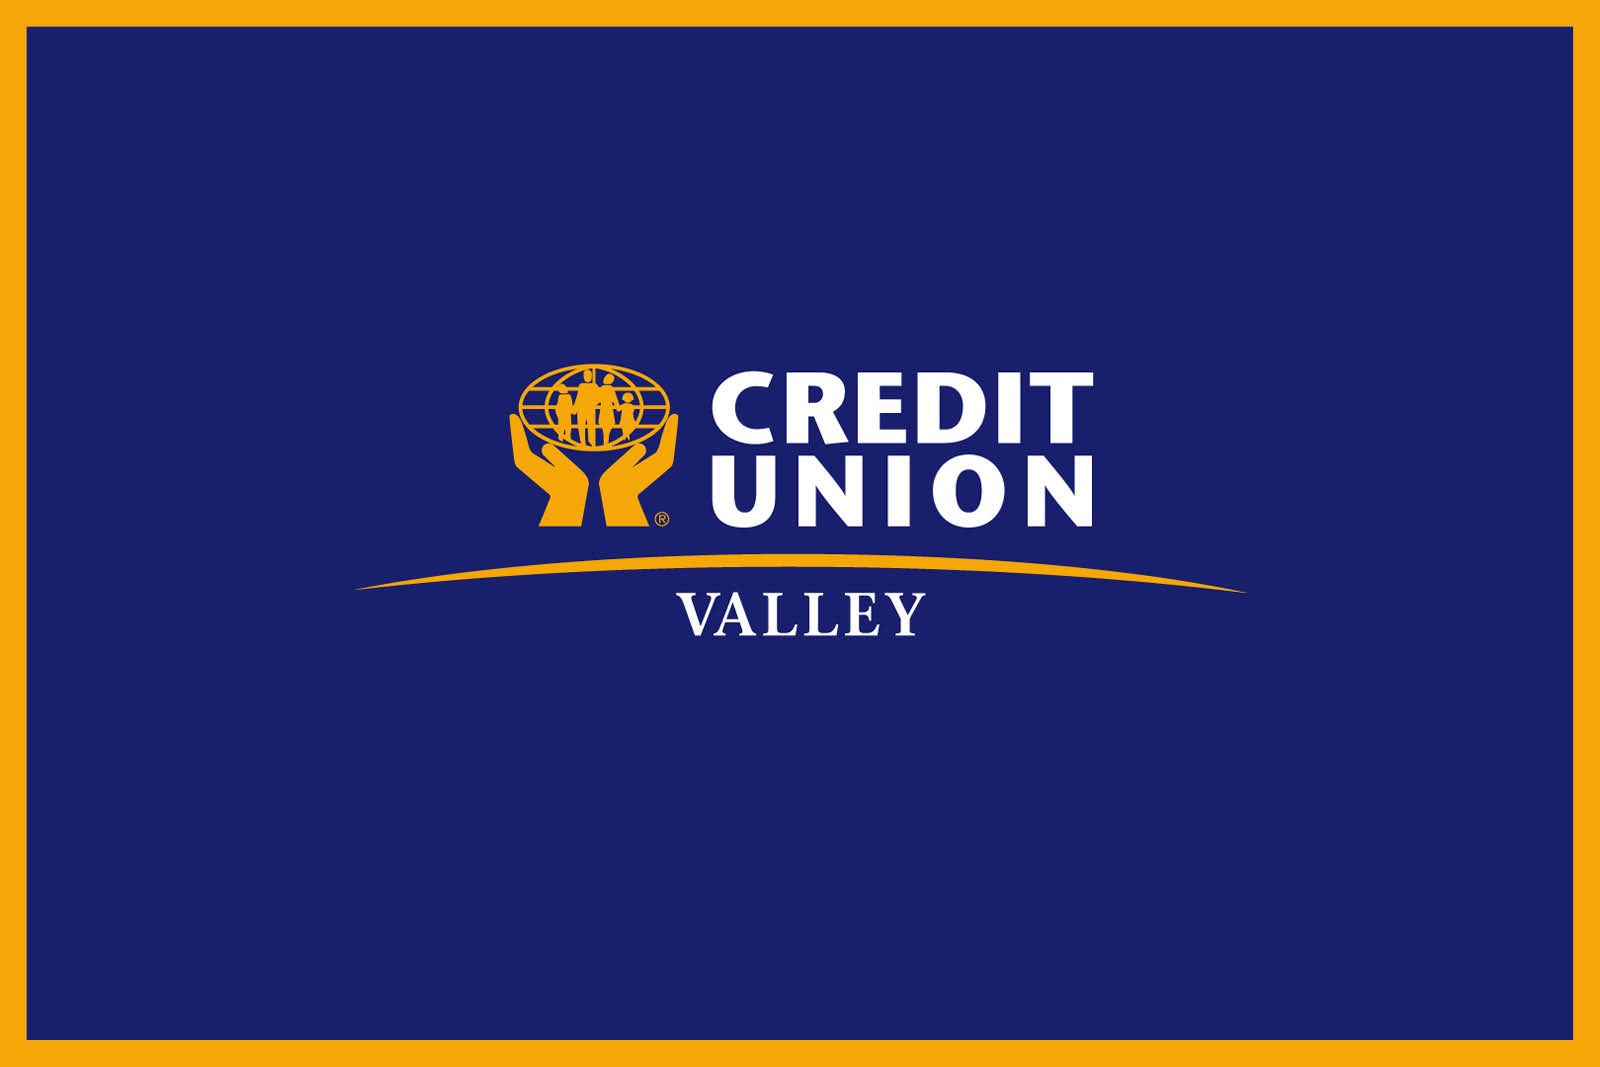 the logo for credit union valley is on a blue background .